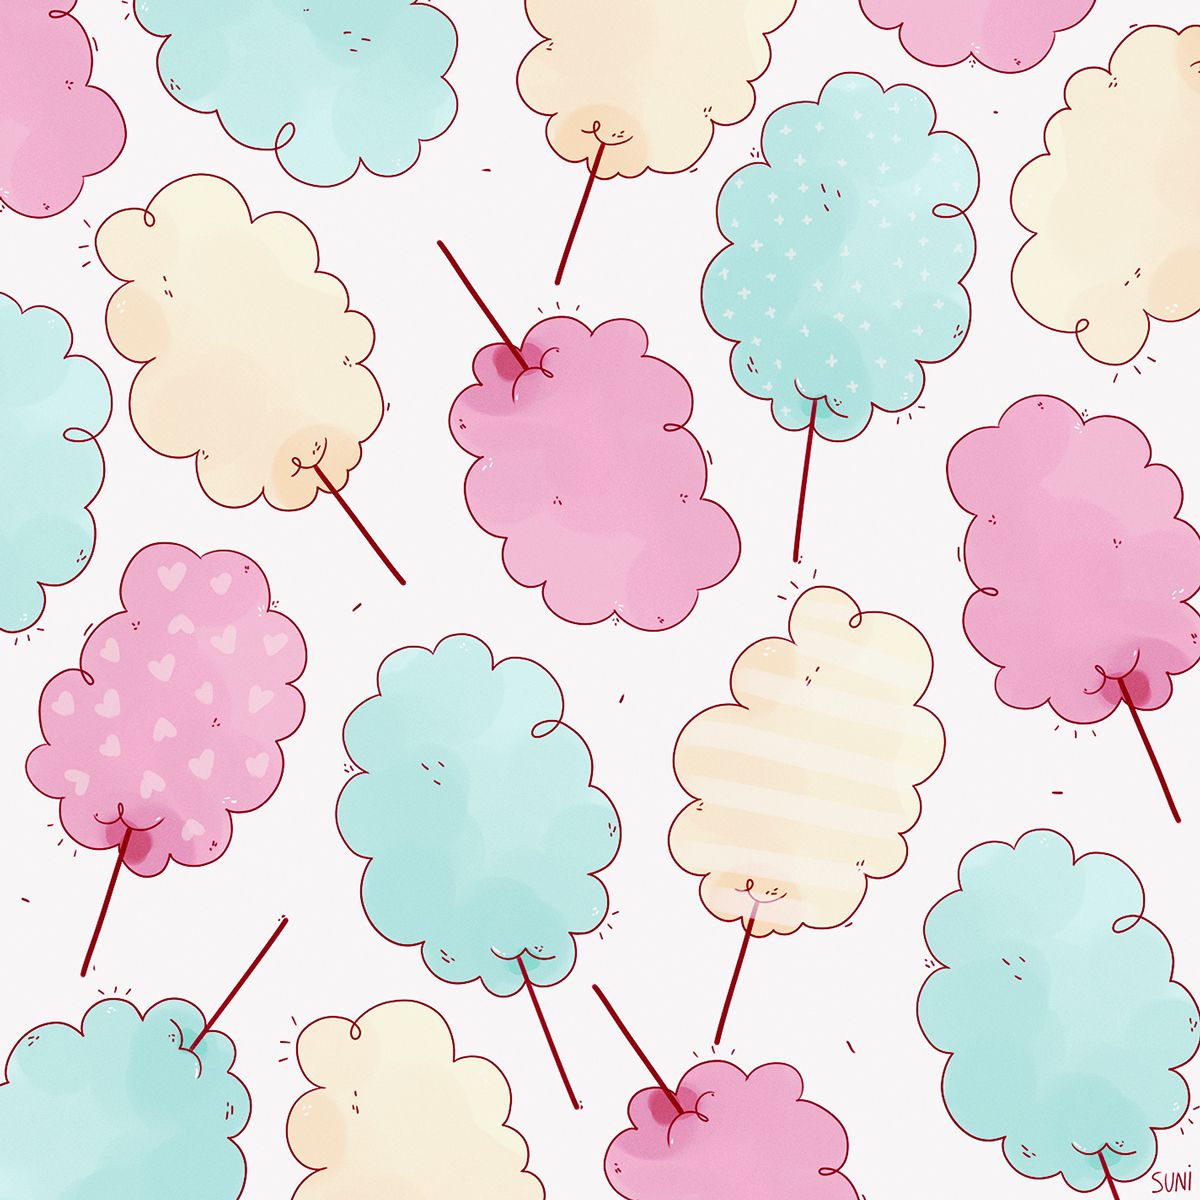 Cotton Candy. Candy art, Candy background, Candy floss